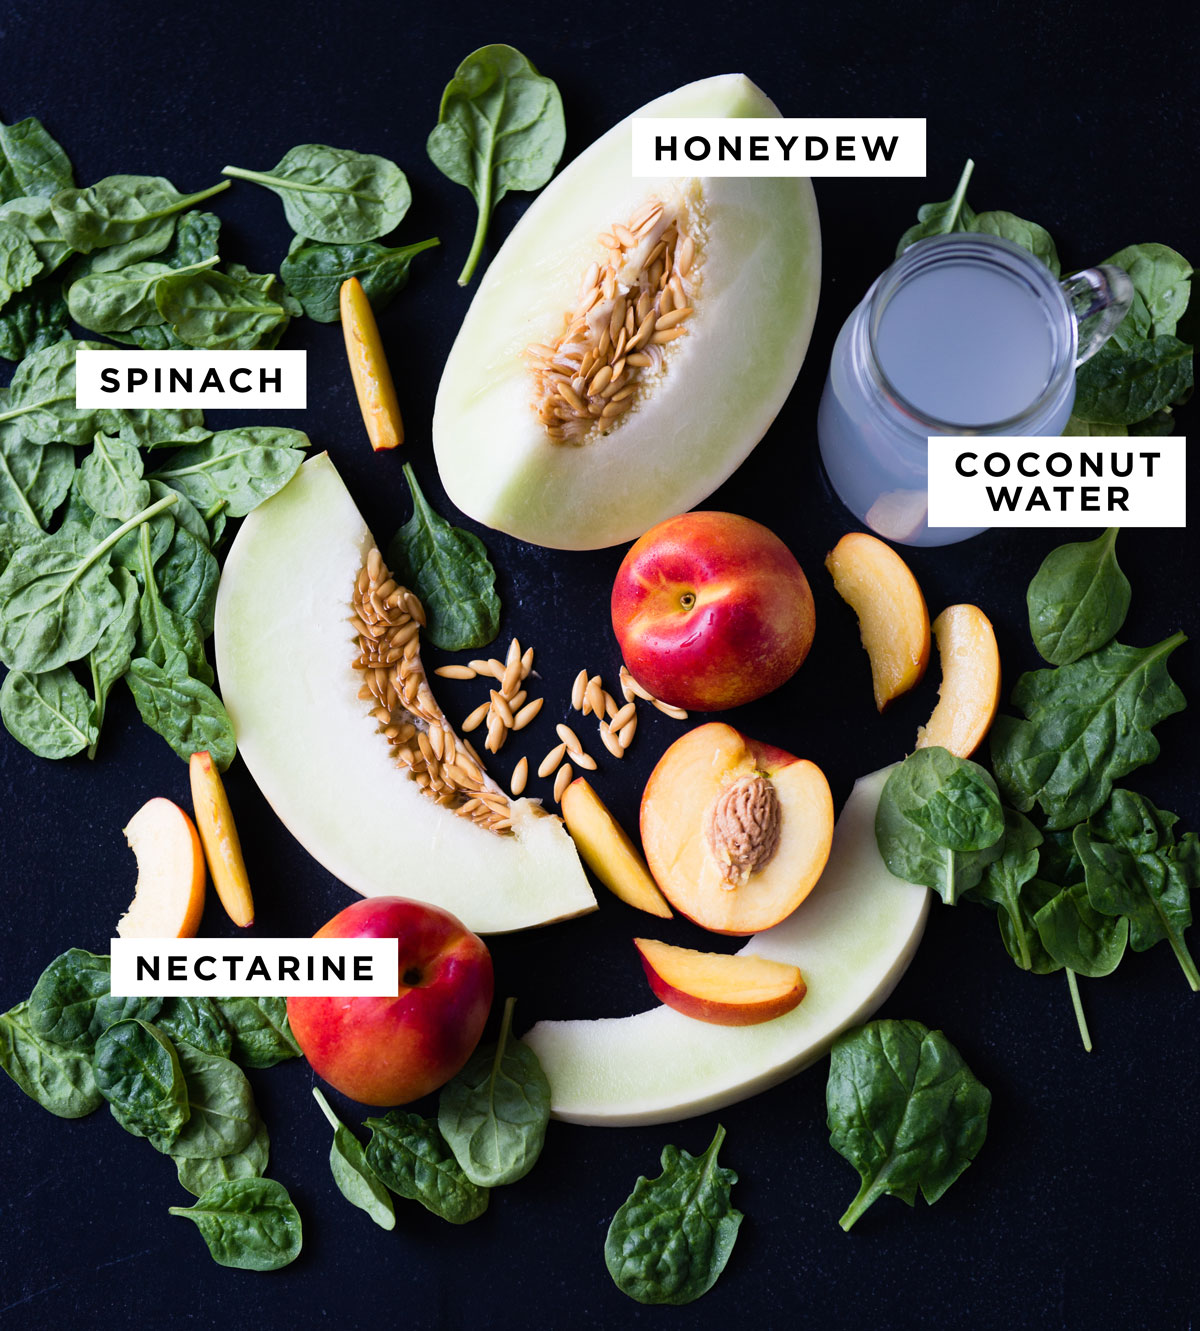 labeled ingredients for a honeydew smoothie including honeydew, spinach, coconut water and nectarine.